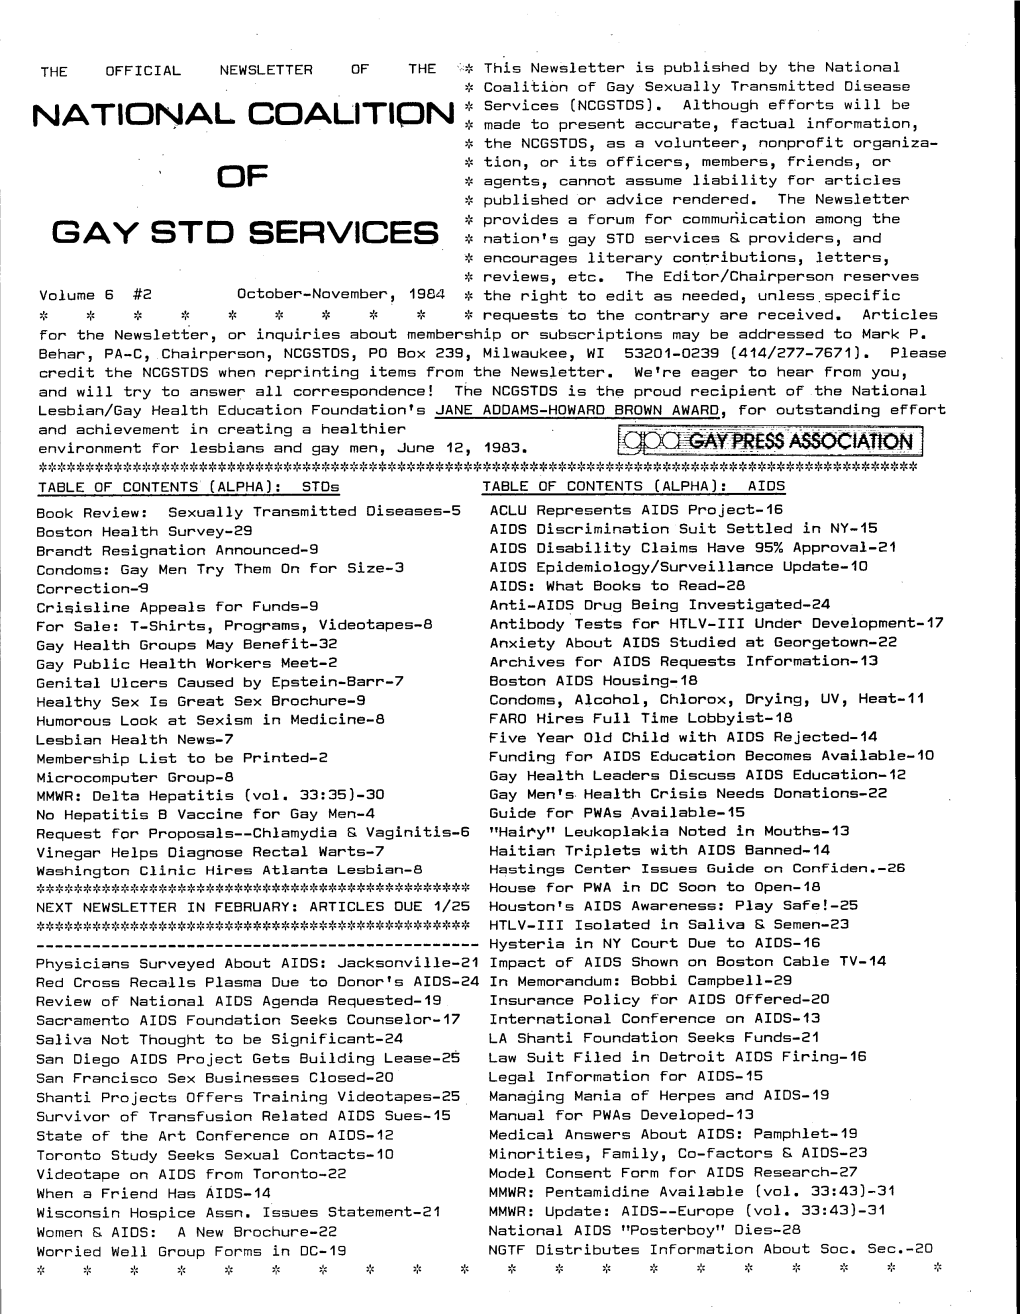 GAY STD SERVICES * Nation's Gay STD Services & Providers, and * Encourages Literary Contributions, Letters, * Reviews, Etc